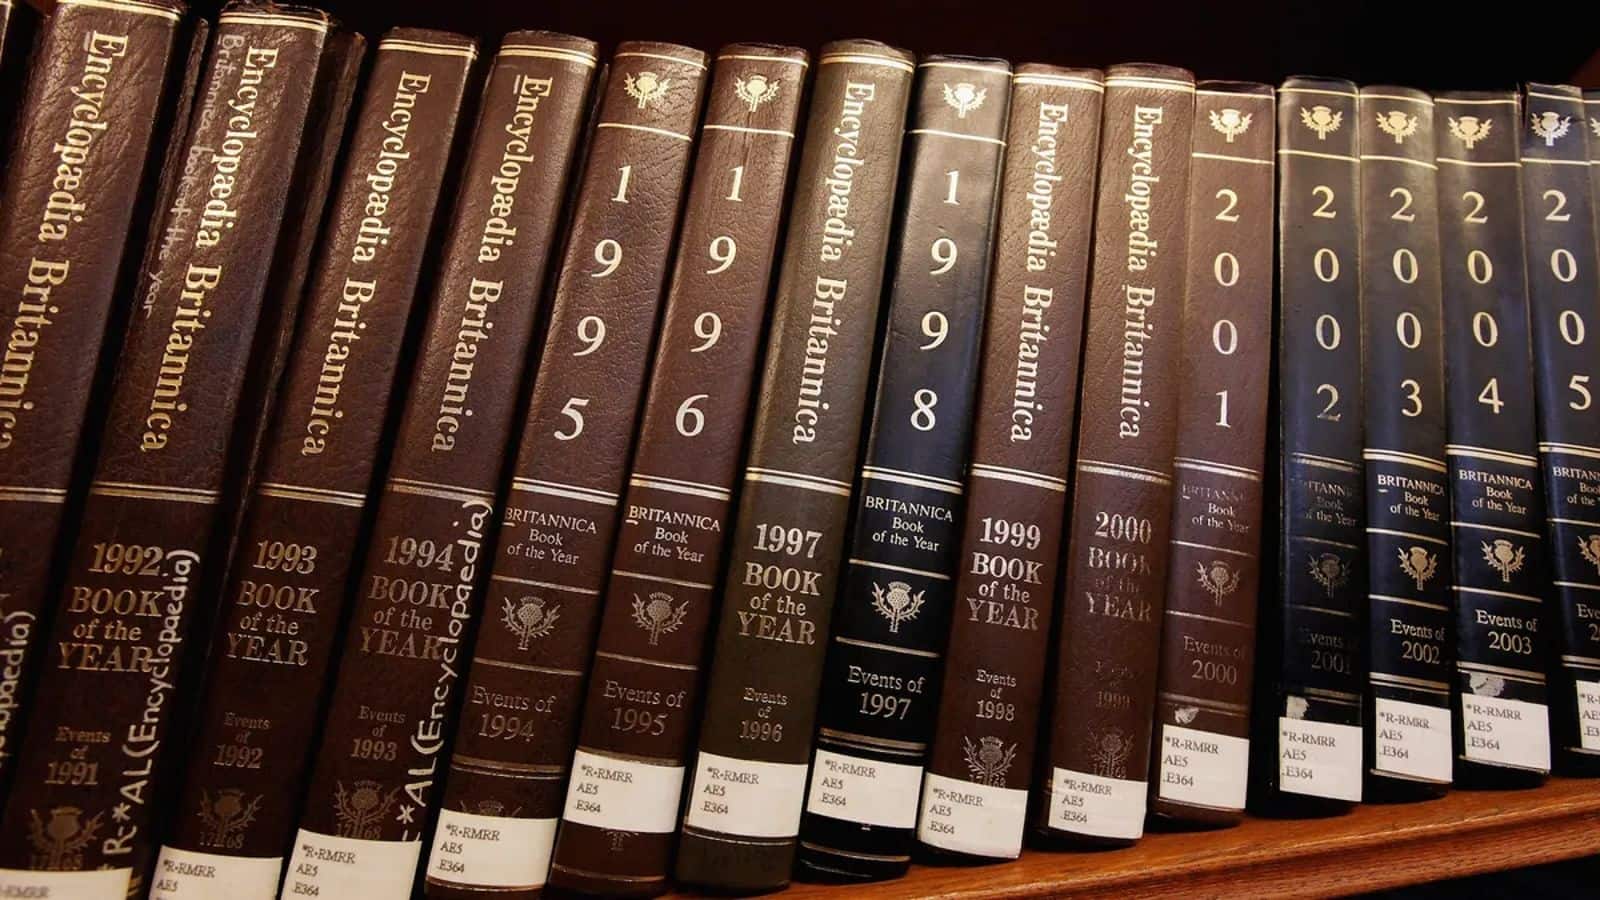 Encyclopaedia Britannica aiming for $1 billion valuation in forthcoming IPO